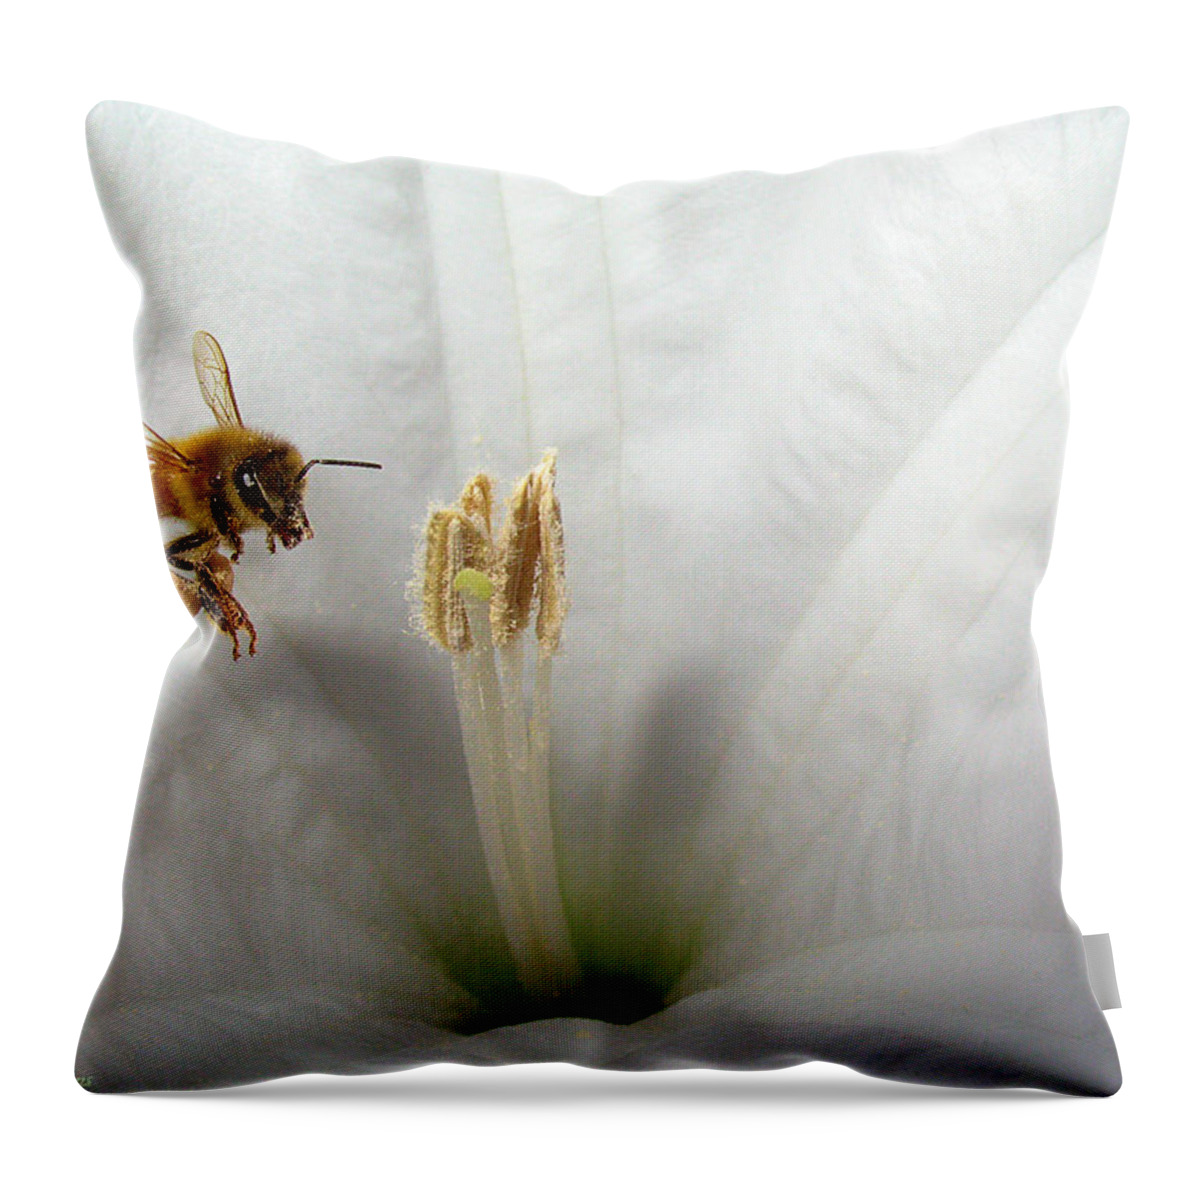 Bee Throw Pillow featuring the photograph Honey Bee Up Close And Personal by Joyce Dickens